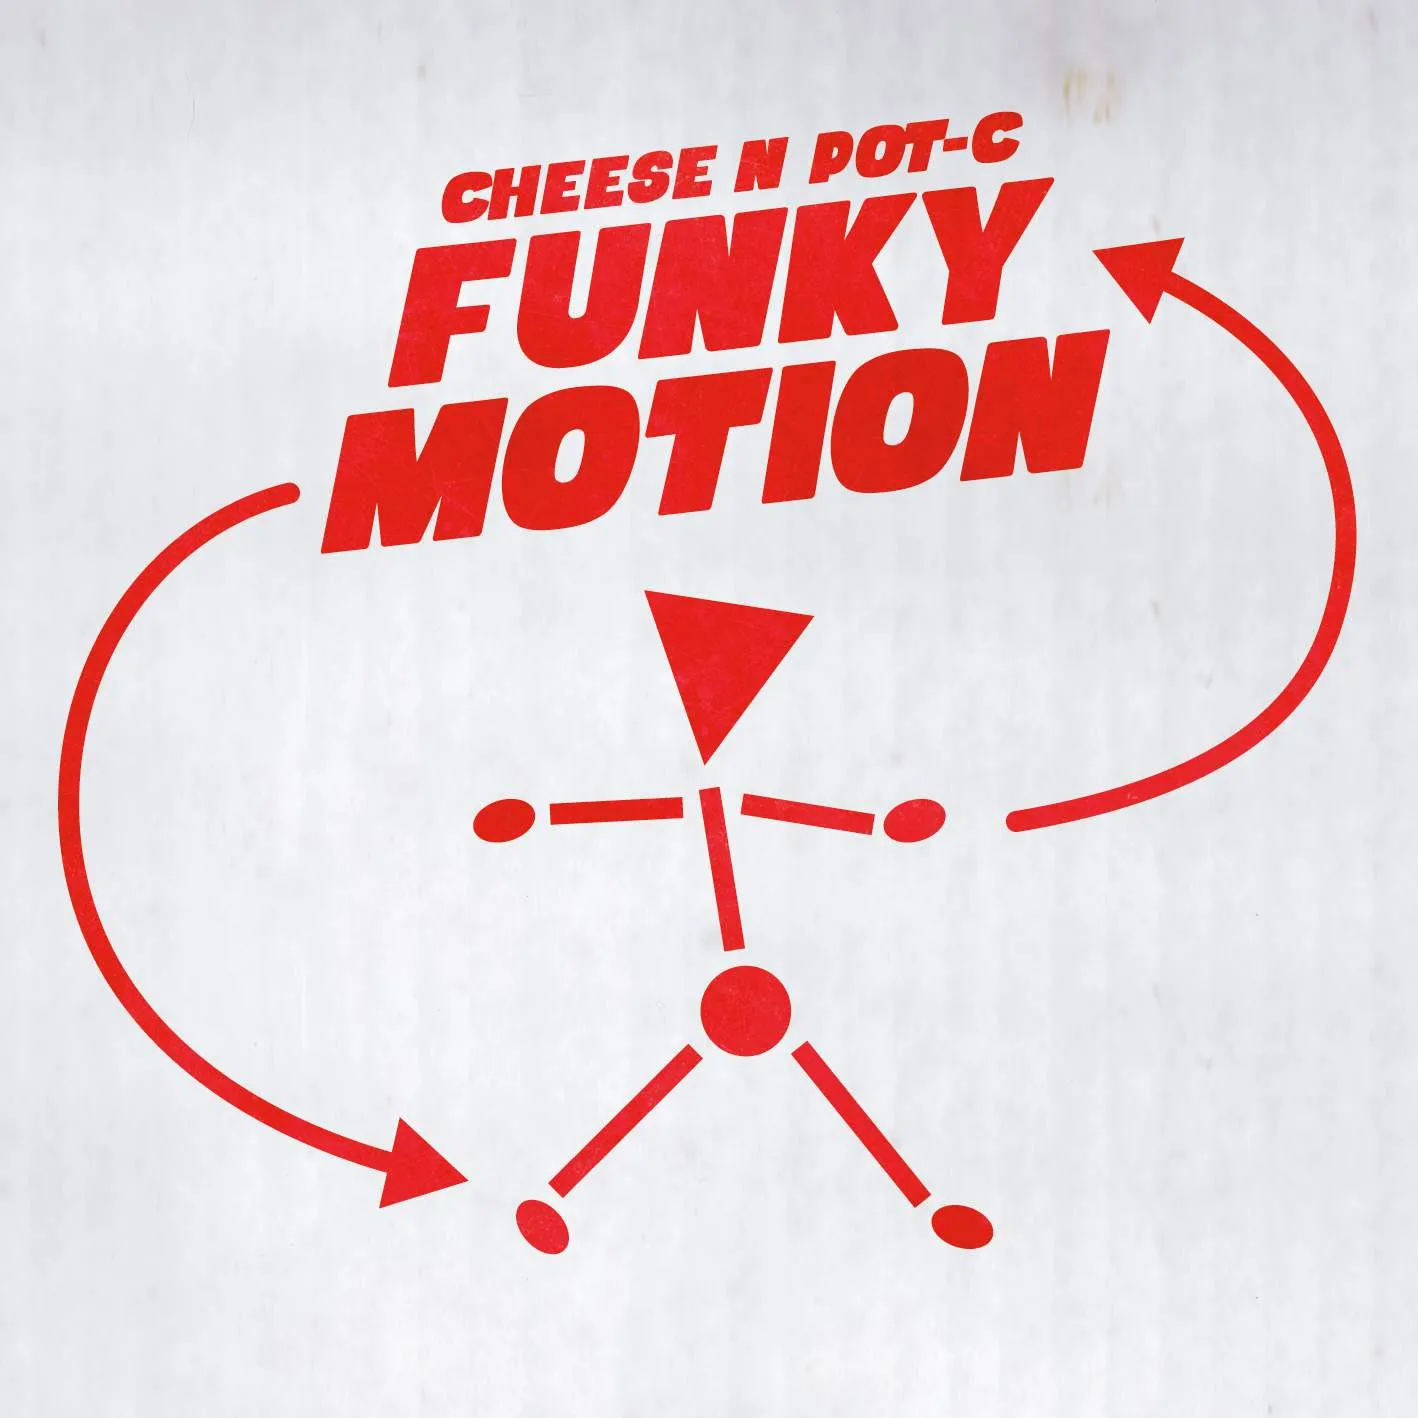 Cover of Cheese N Pot-C - Funky Motion